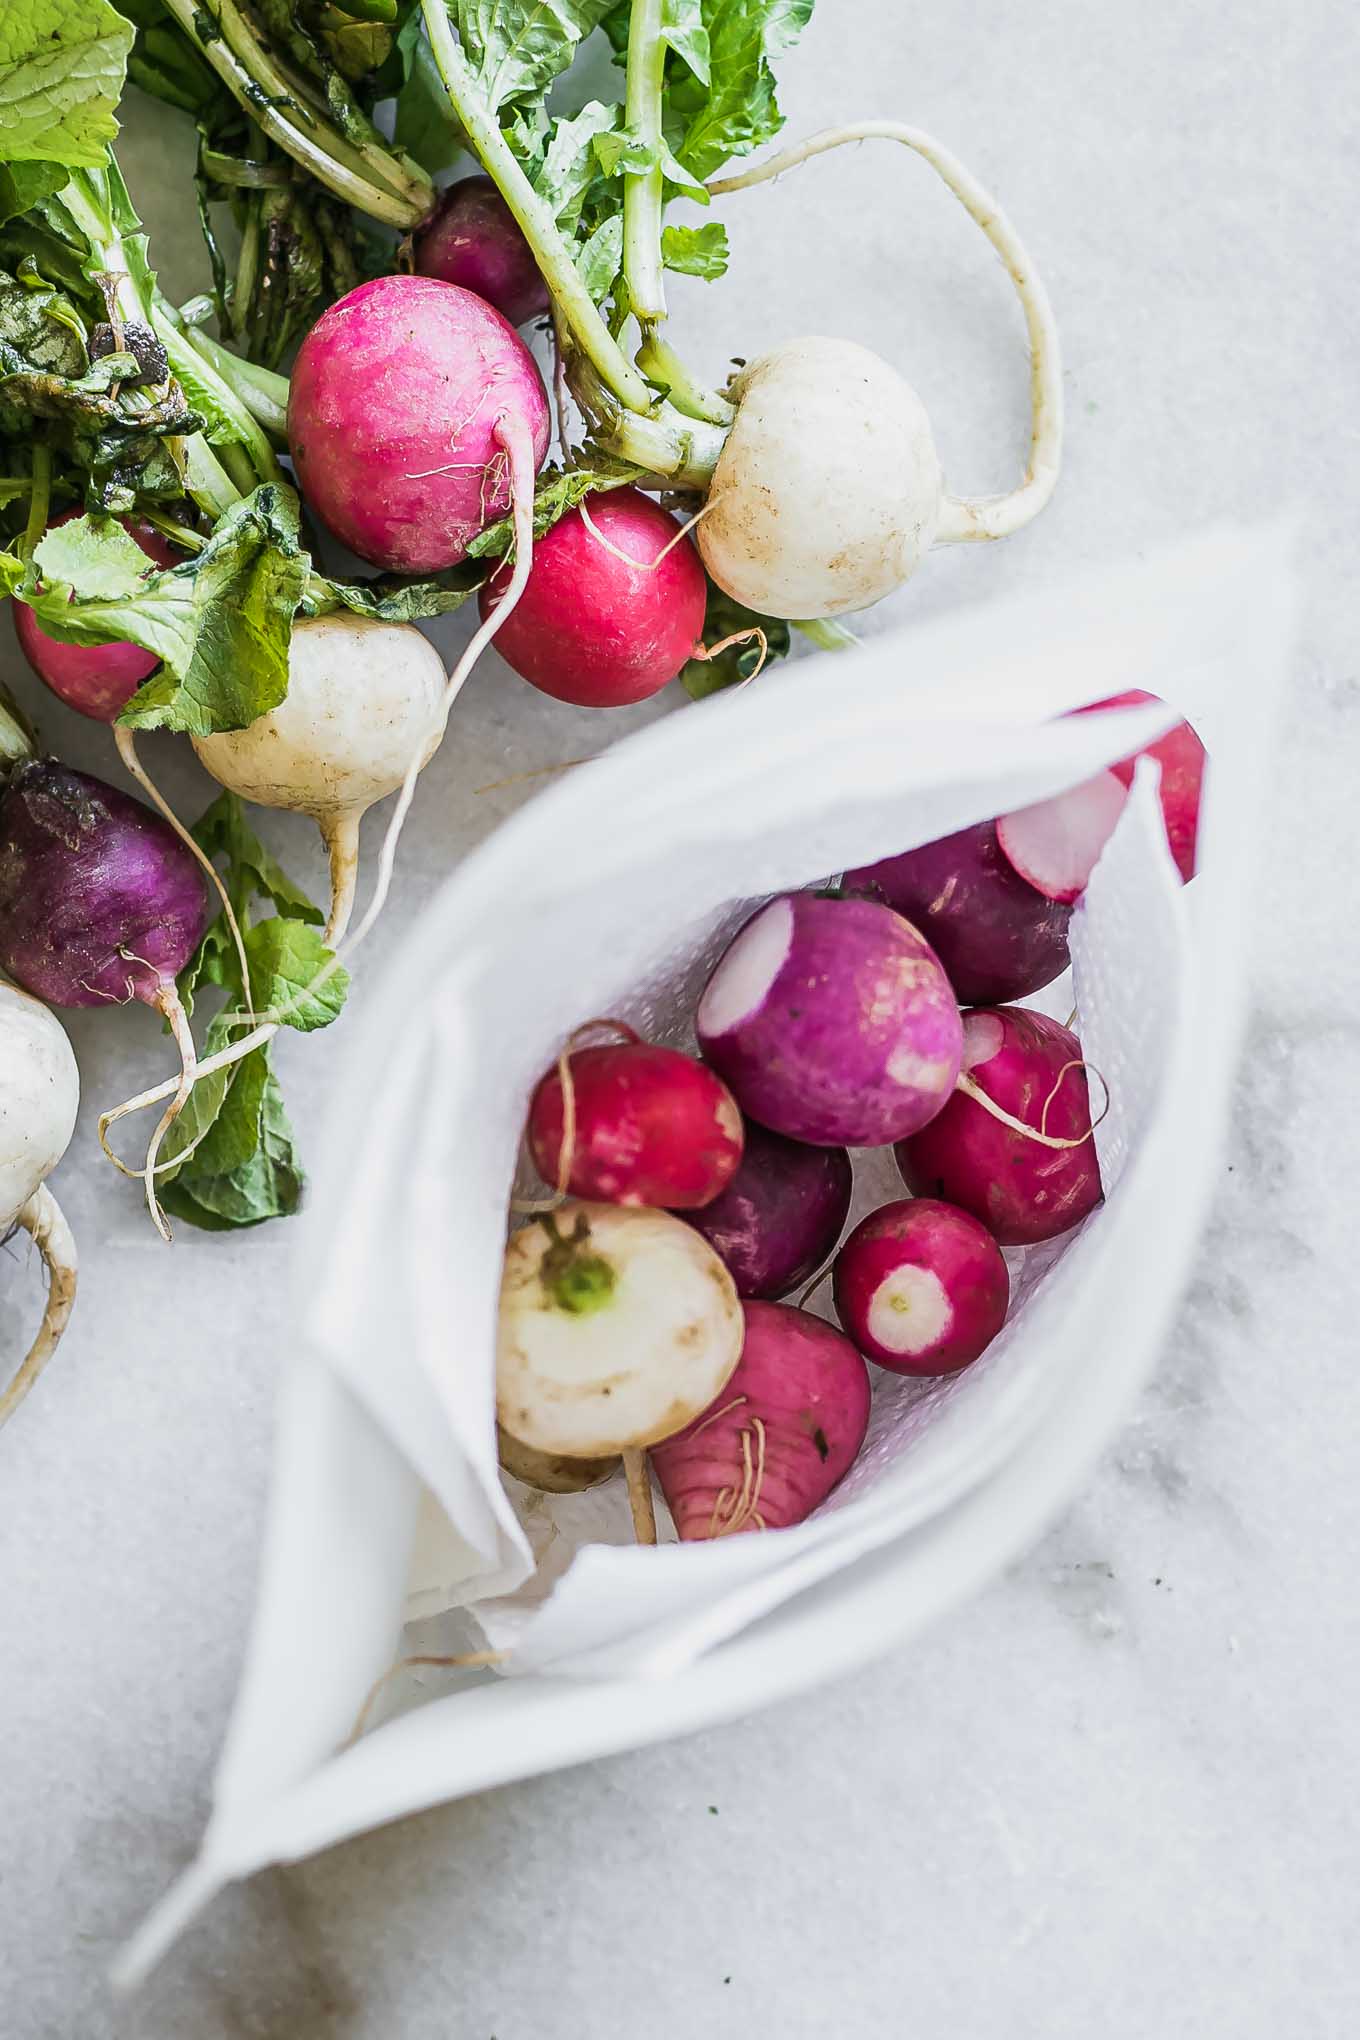 https://www.forkintheroad.co/wp-content/uploads/2022/02/how-to-store-radishes-112.jpg